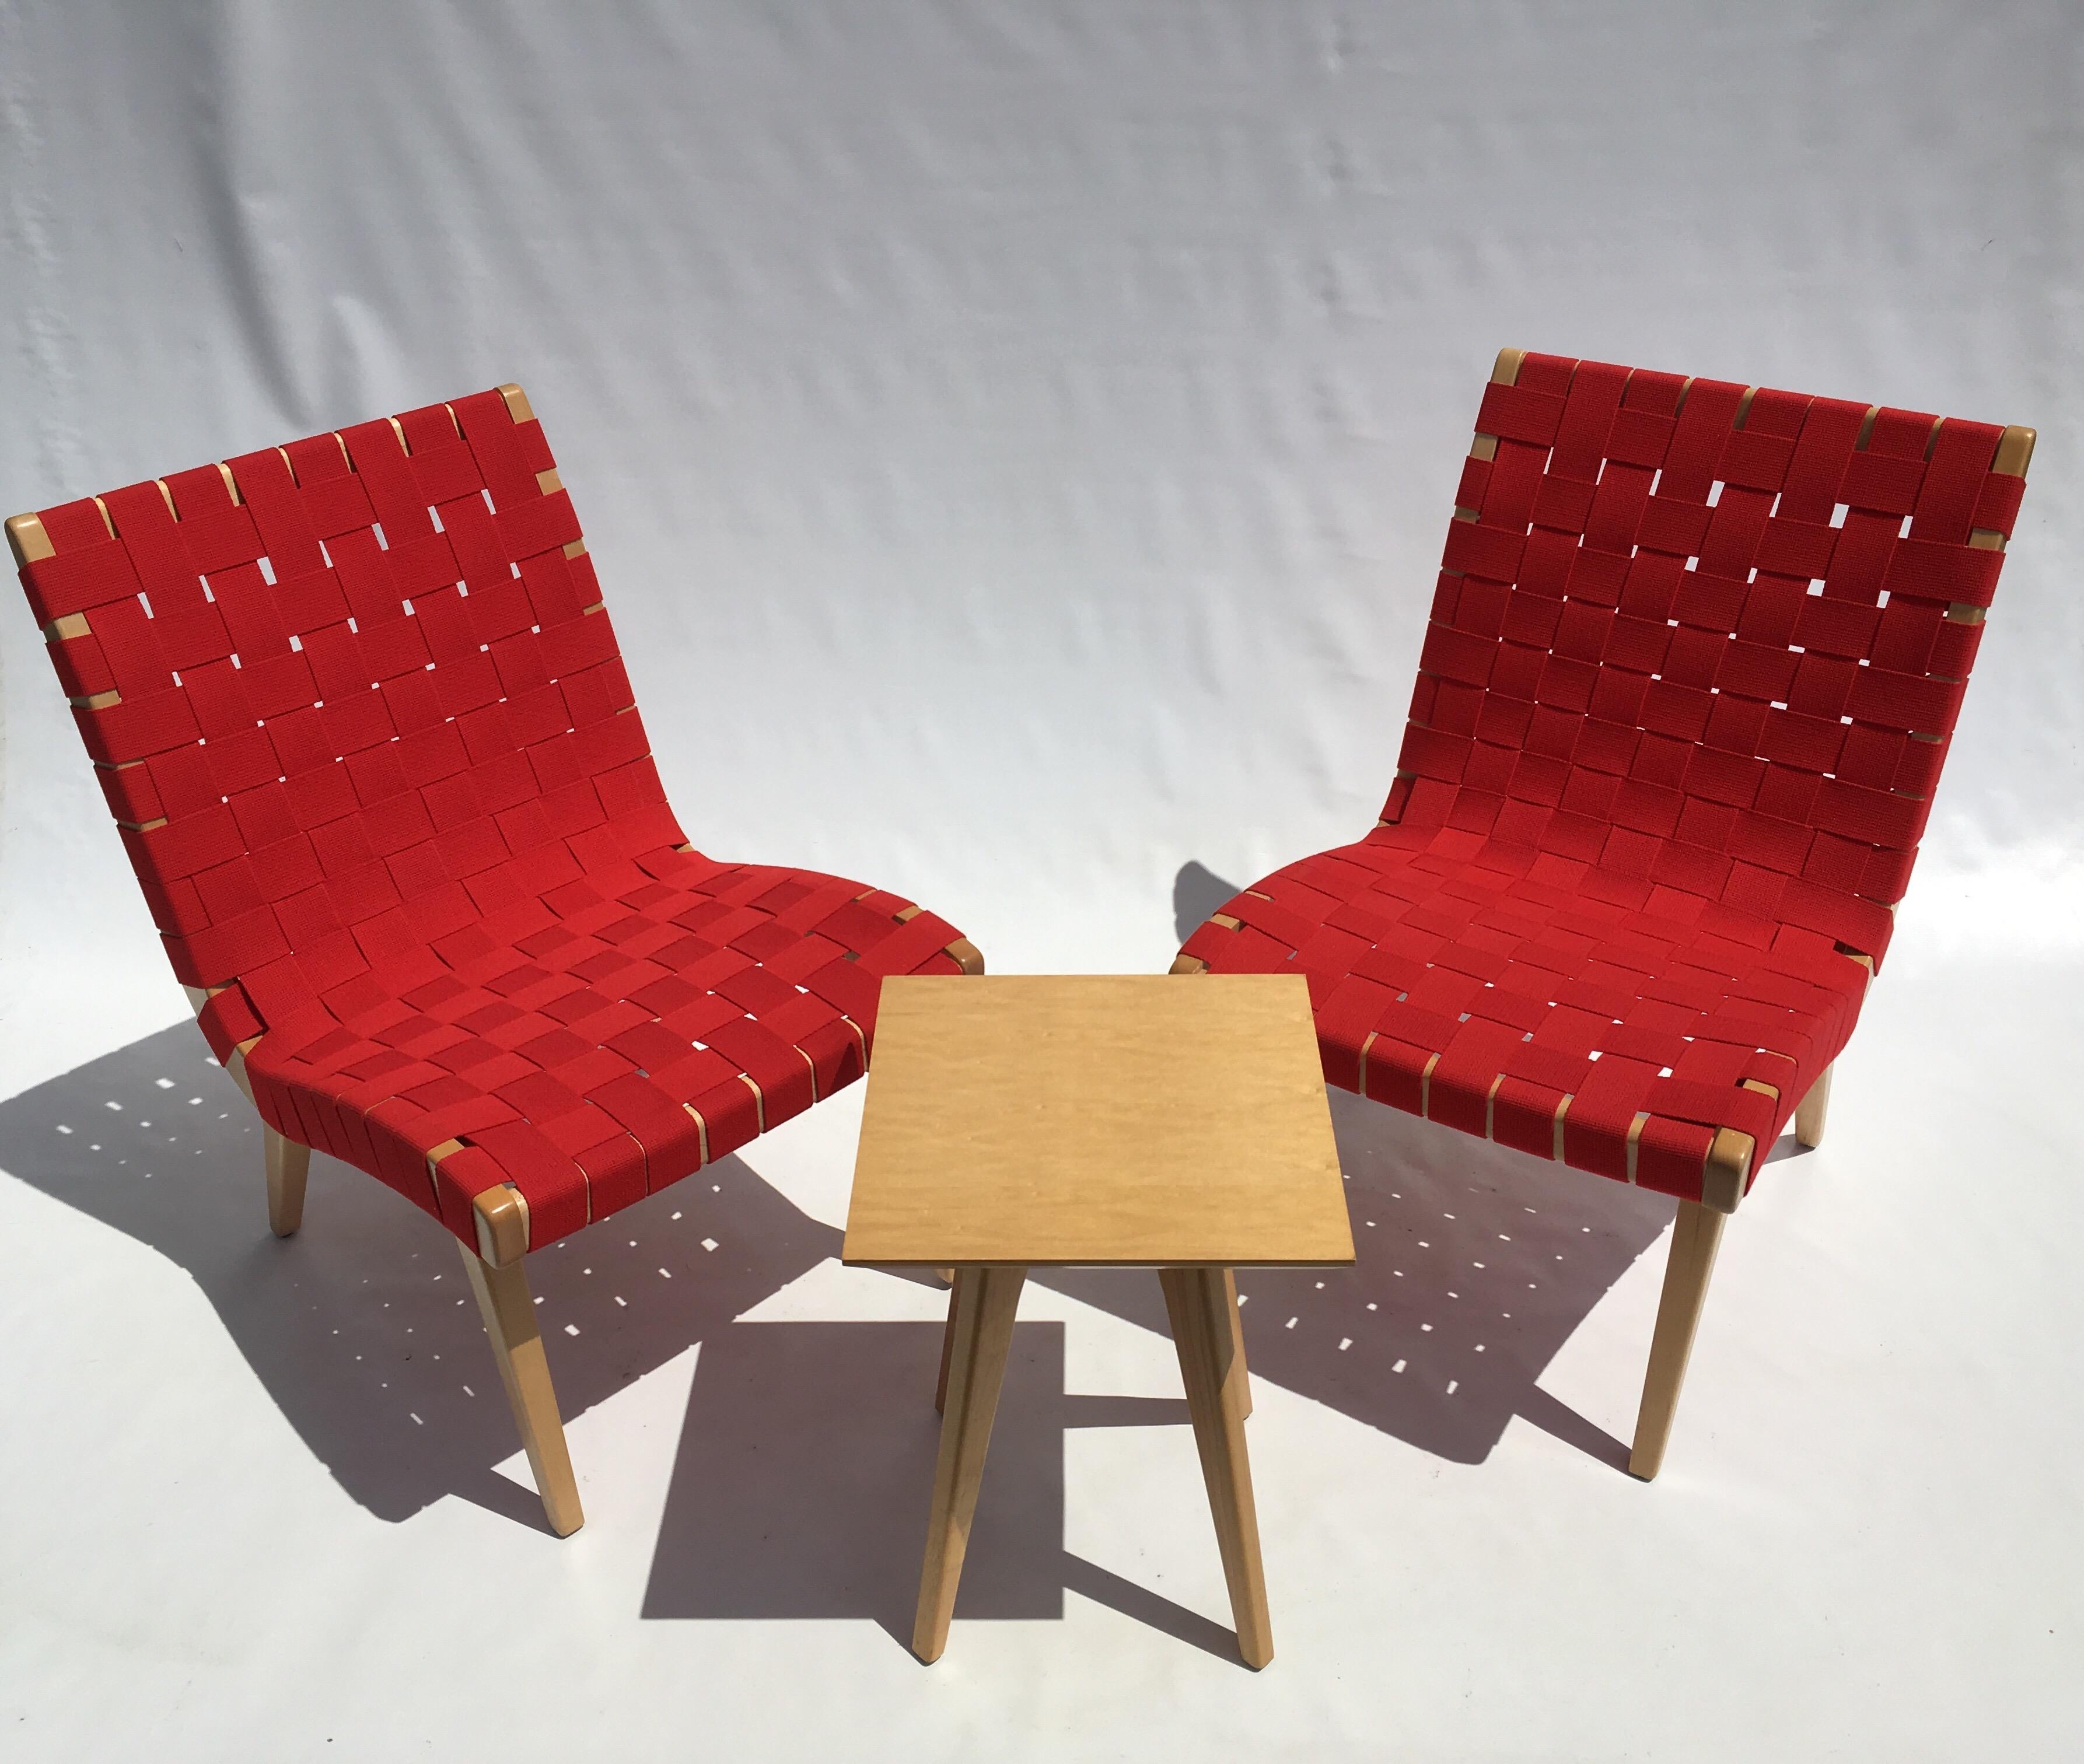 Great pair of original Jens Risom lounge chairs with a matching side table.
Table is 14